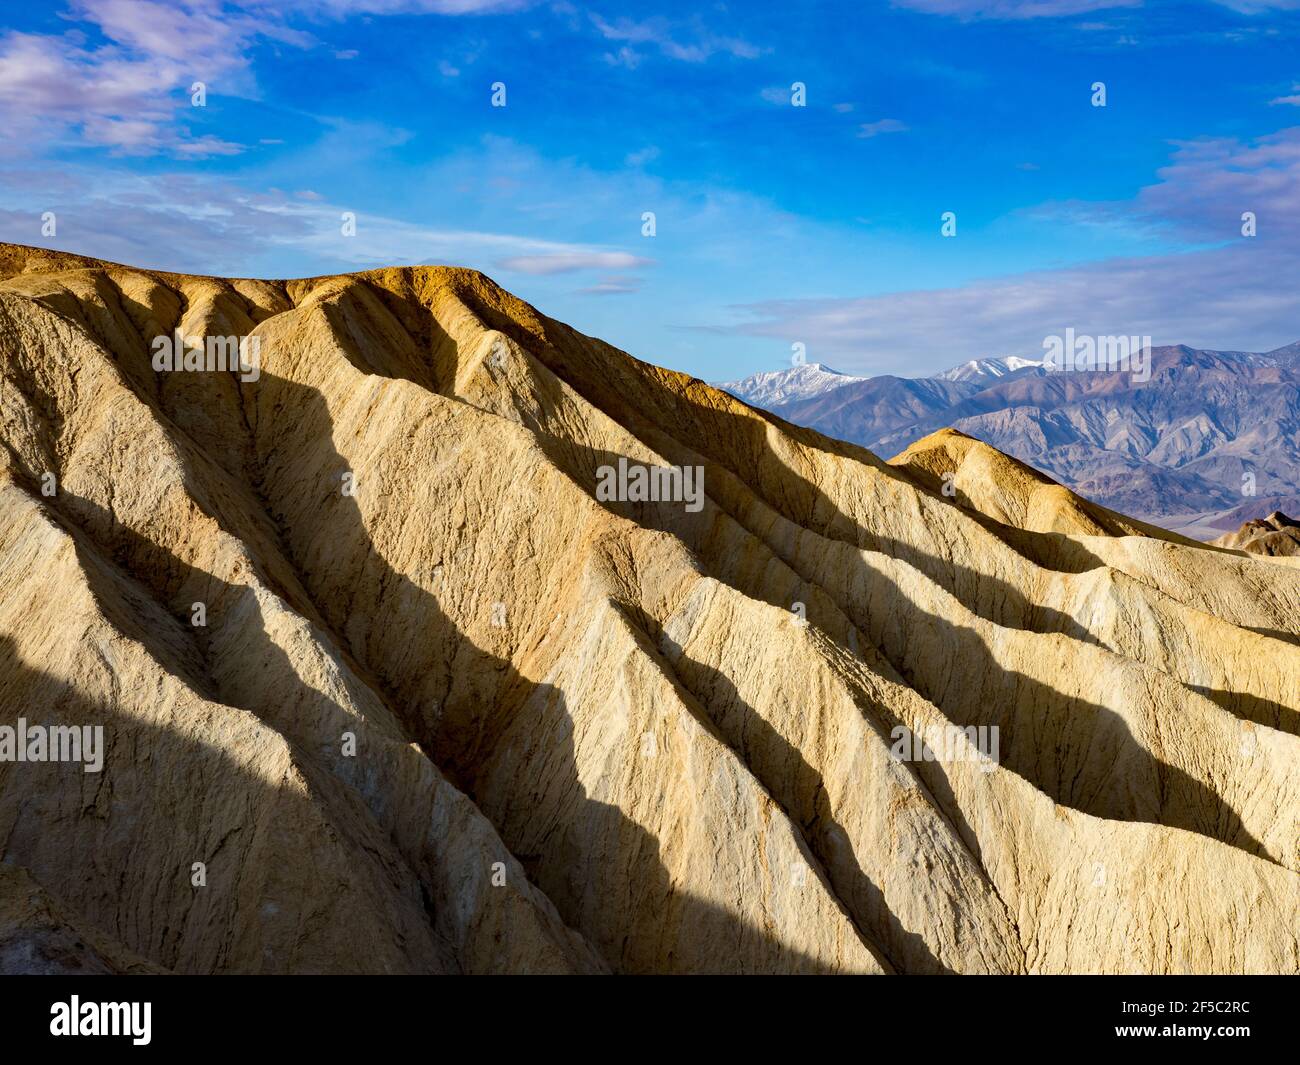 The stunning scenery of the badlands region near Zabriskie point in Death Valley National Park, California, USA Stock Photo